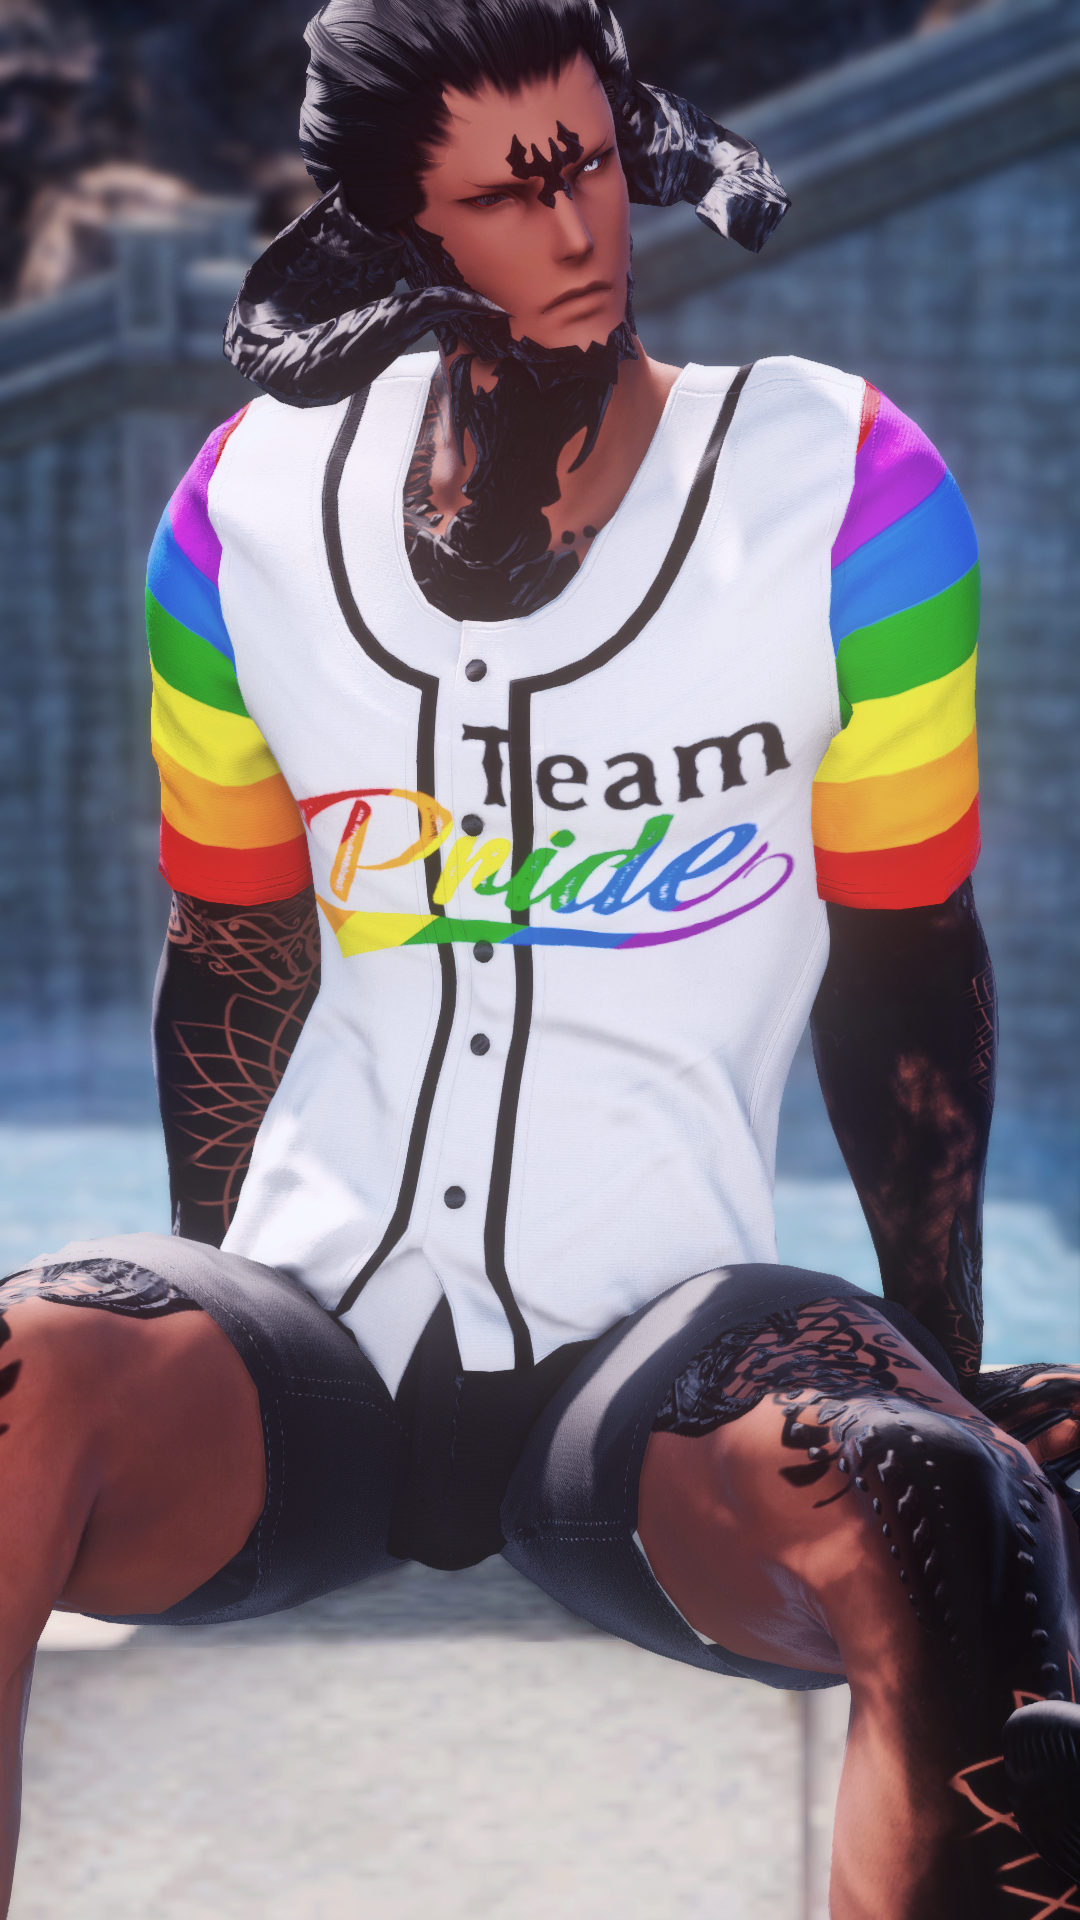 Team Pride Jerseys for All